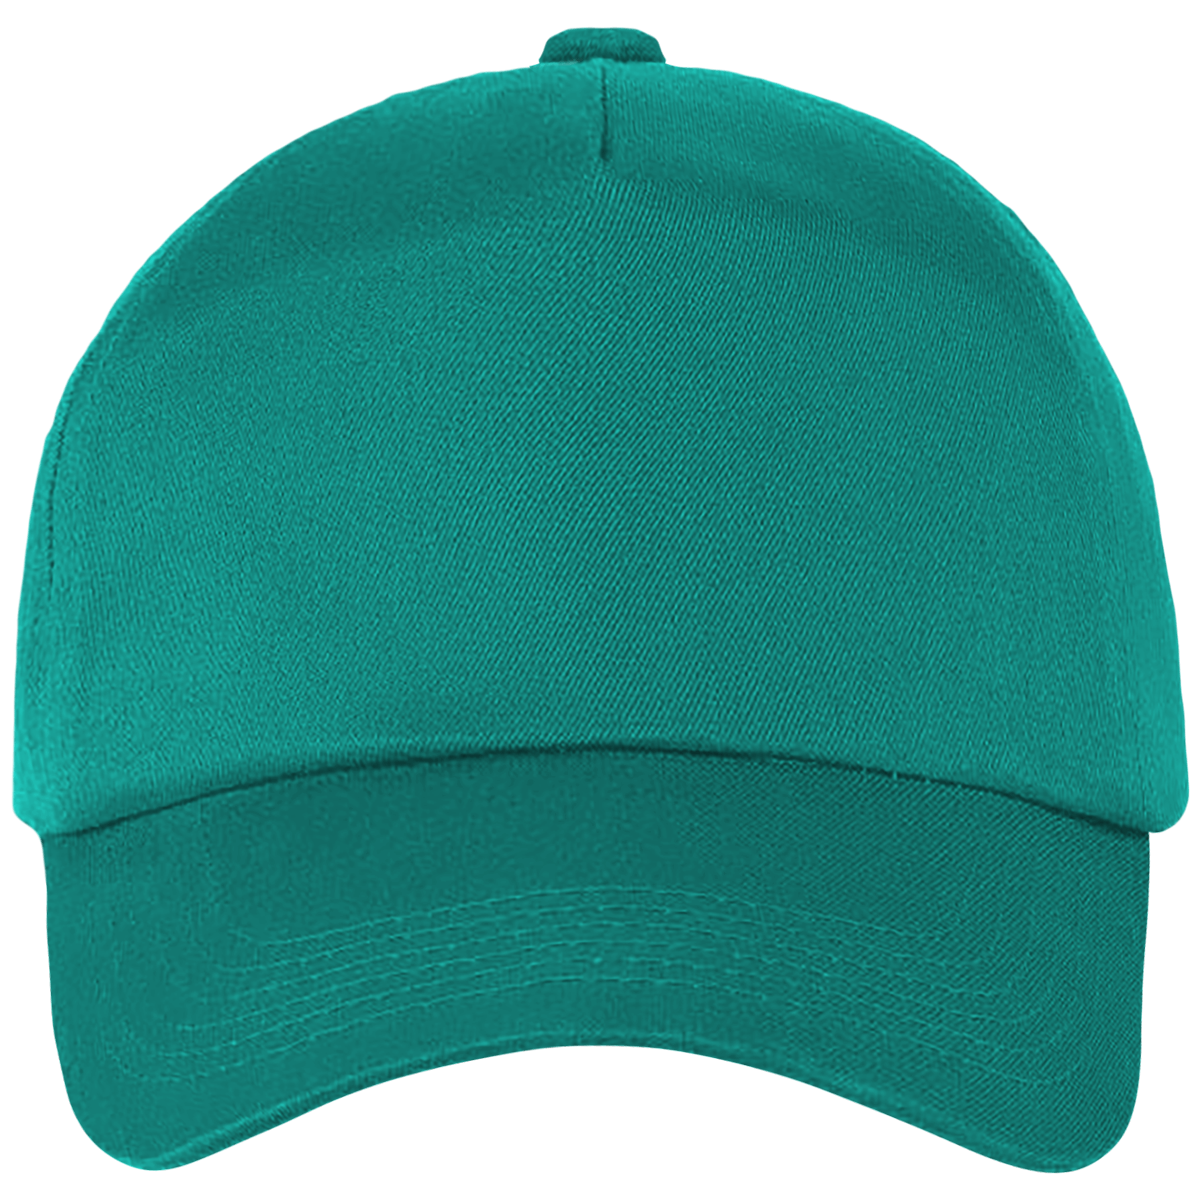 Customizable Fashion Cap In Embroidery And Printing Emerald